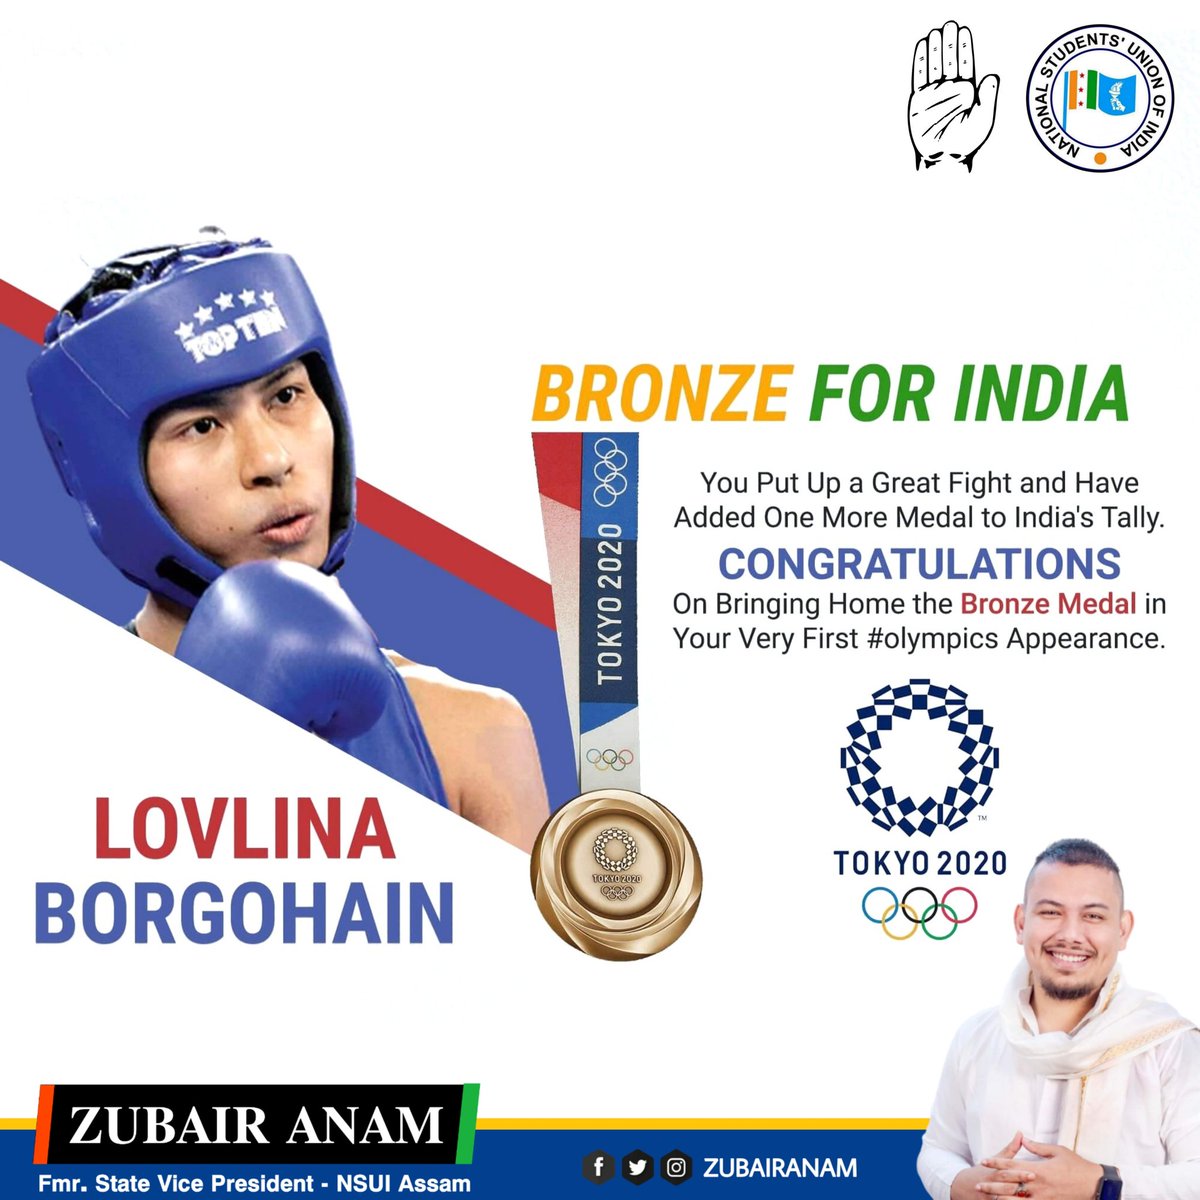 Congratulations to boxer @LovlinaBorgohai on winning the bronze medal at the Olympics. The nation is proud of your achievement 🇮🇳👏👏 My best wishes !